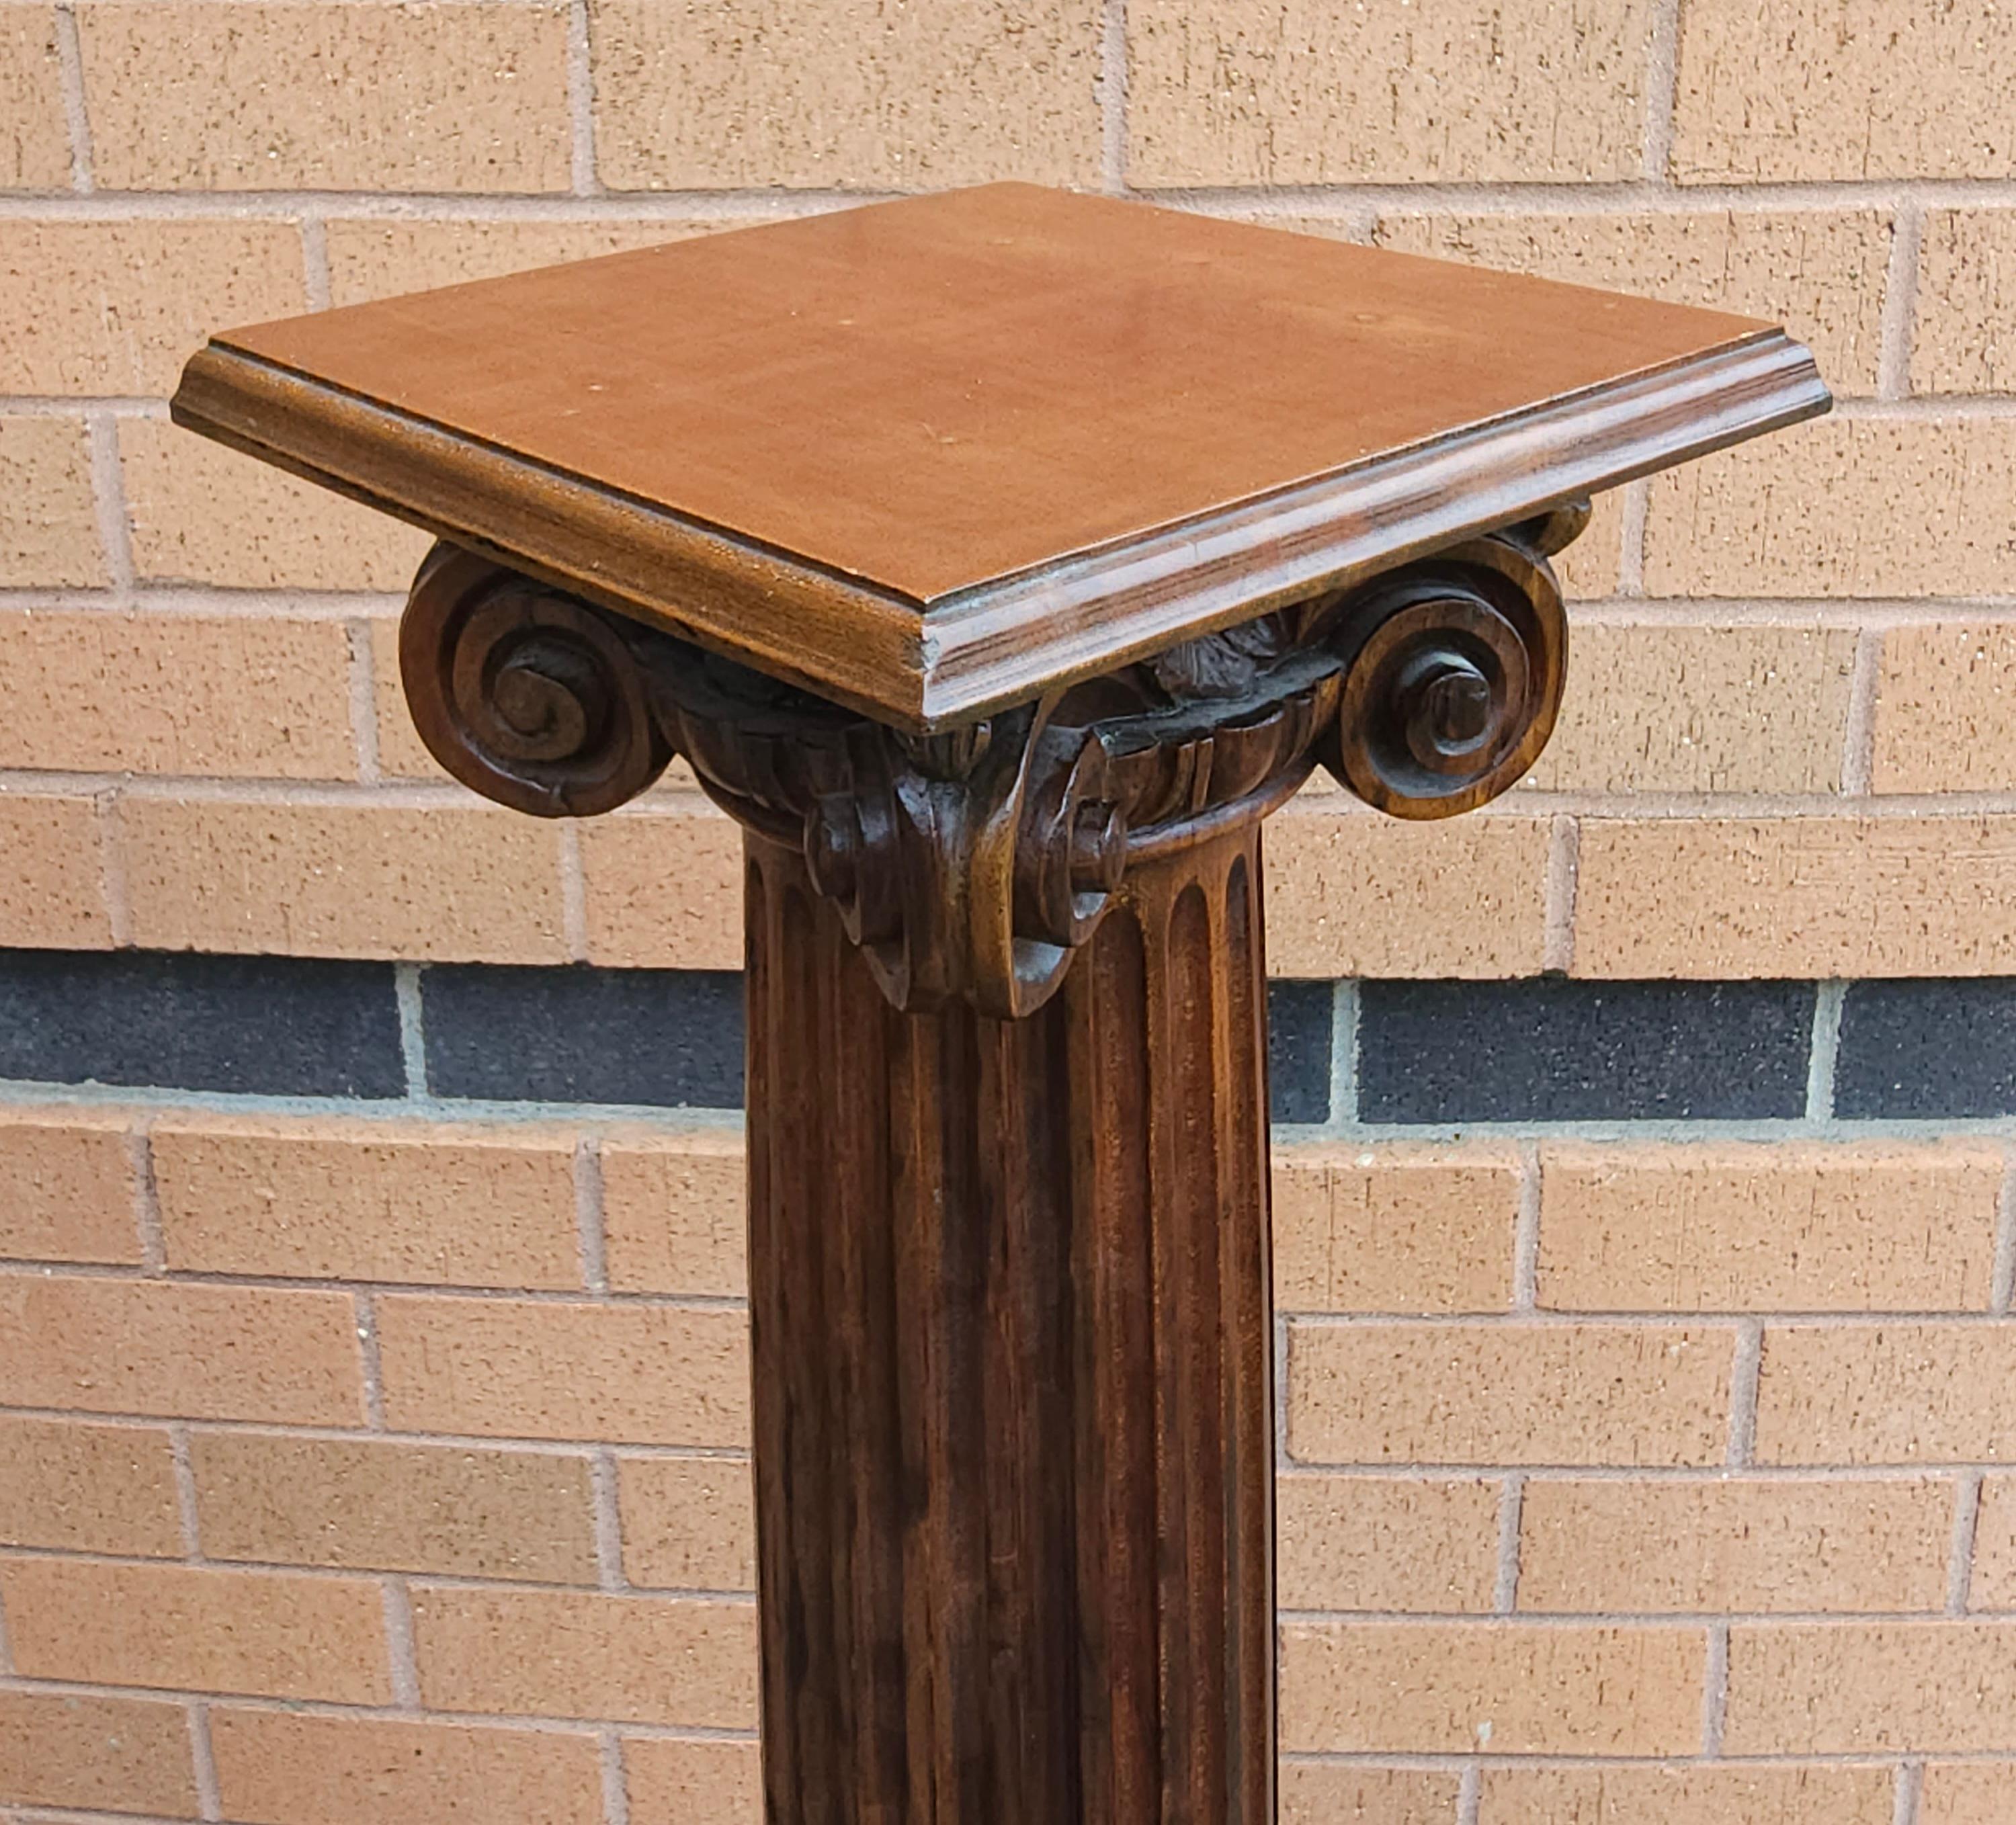 Pair Of Mahogany Ionic Order Style Column-Form Pedestals For Sale 2